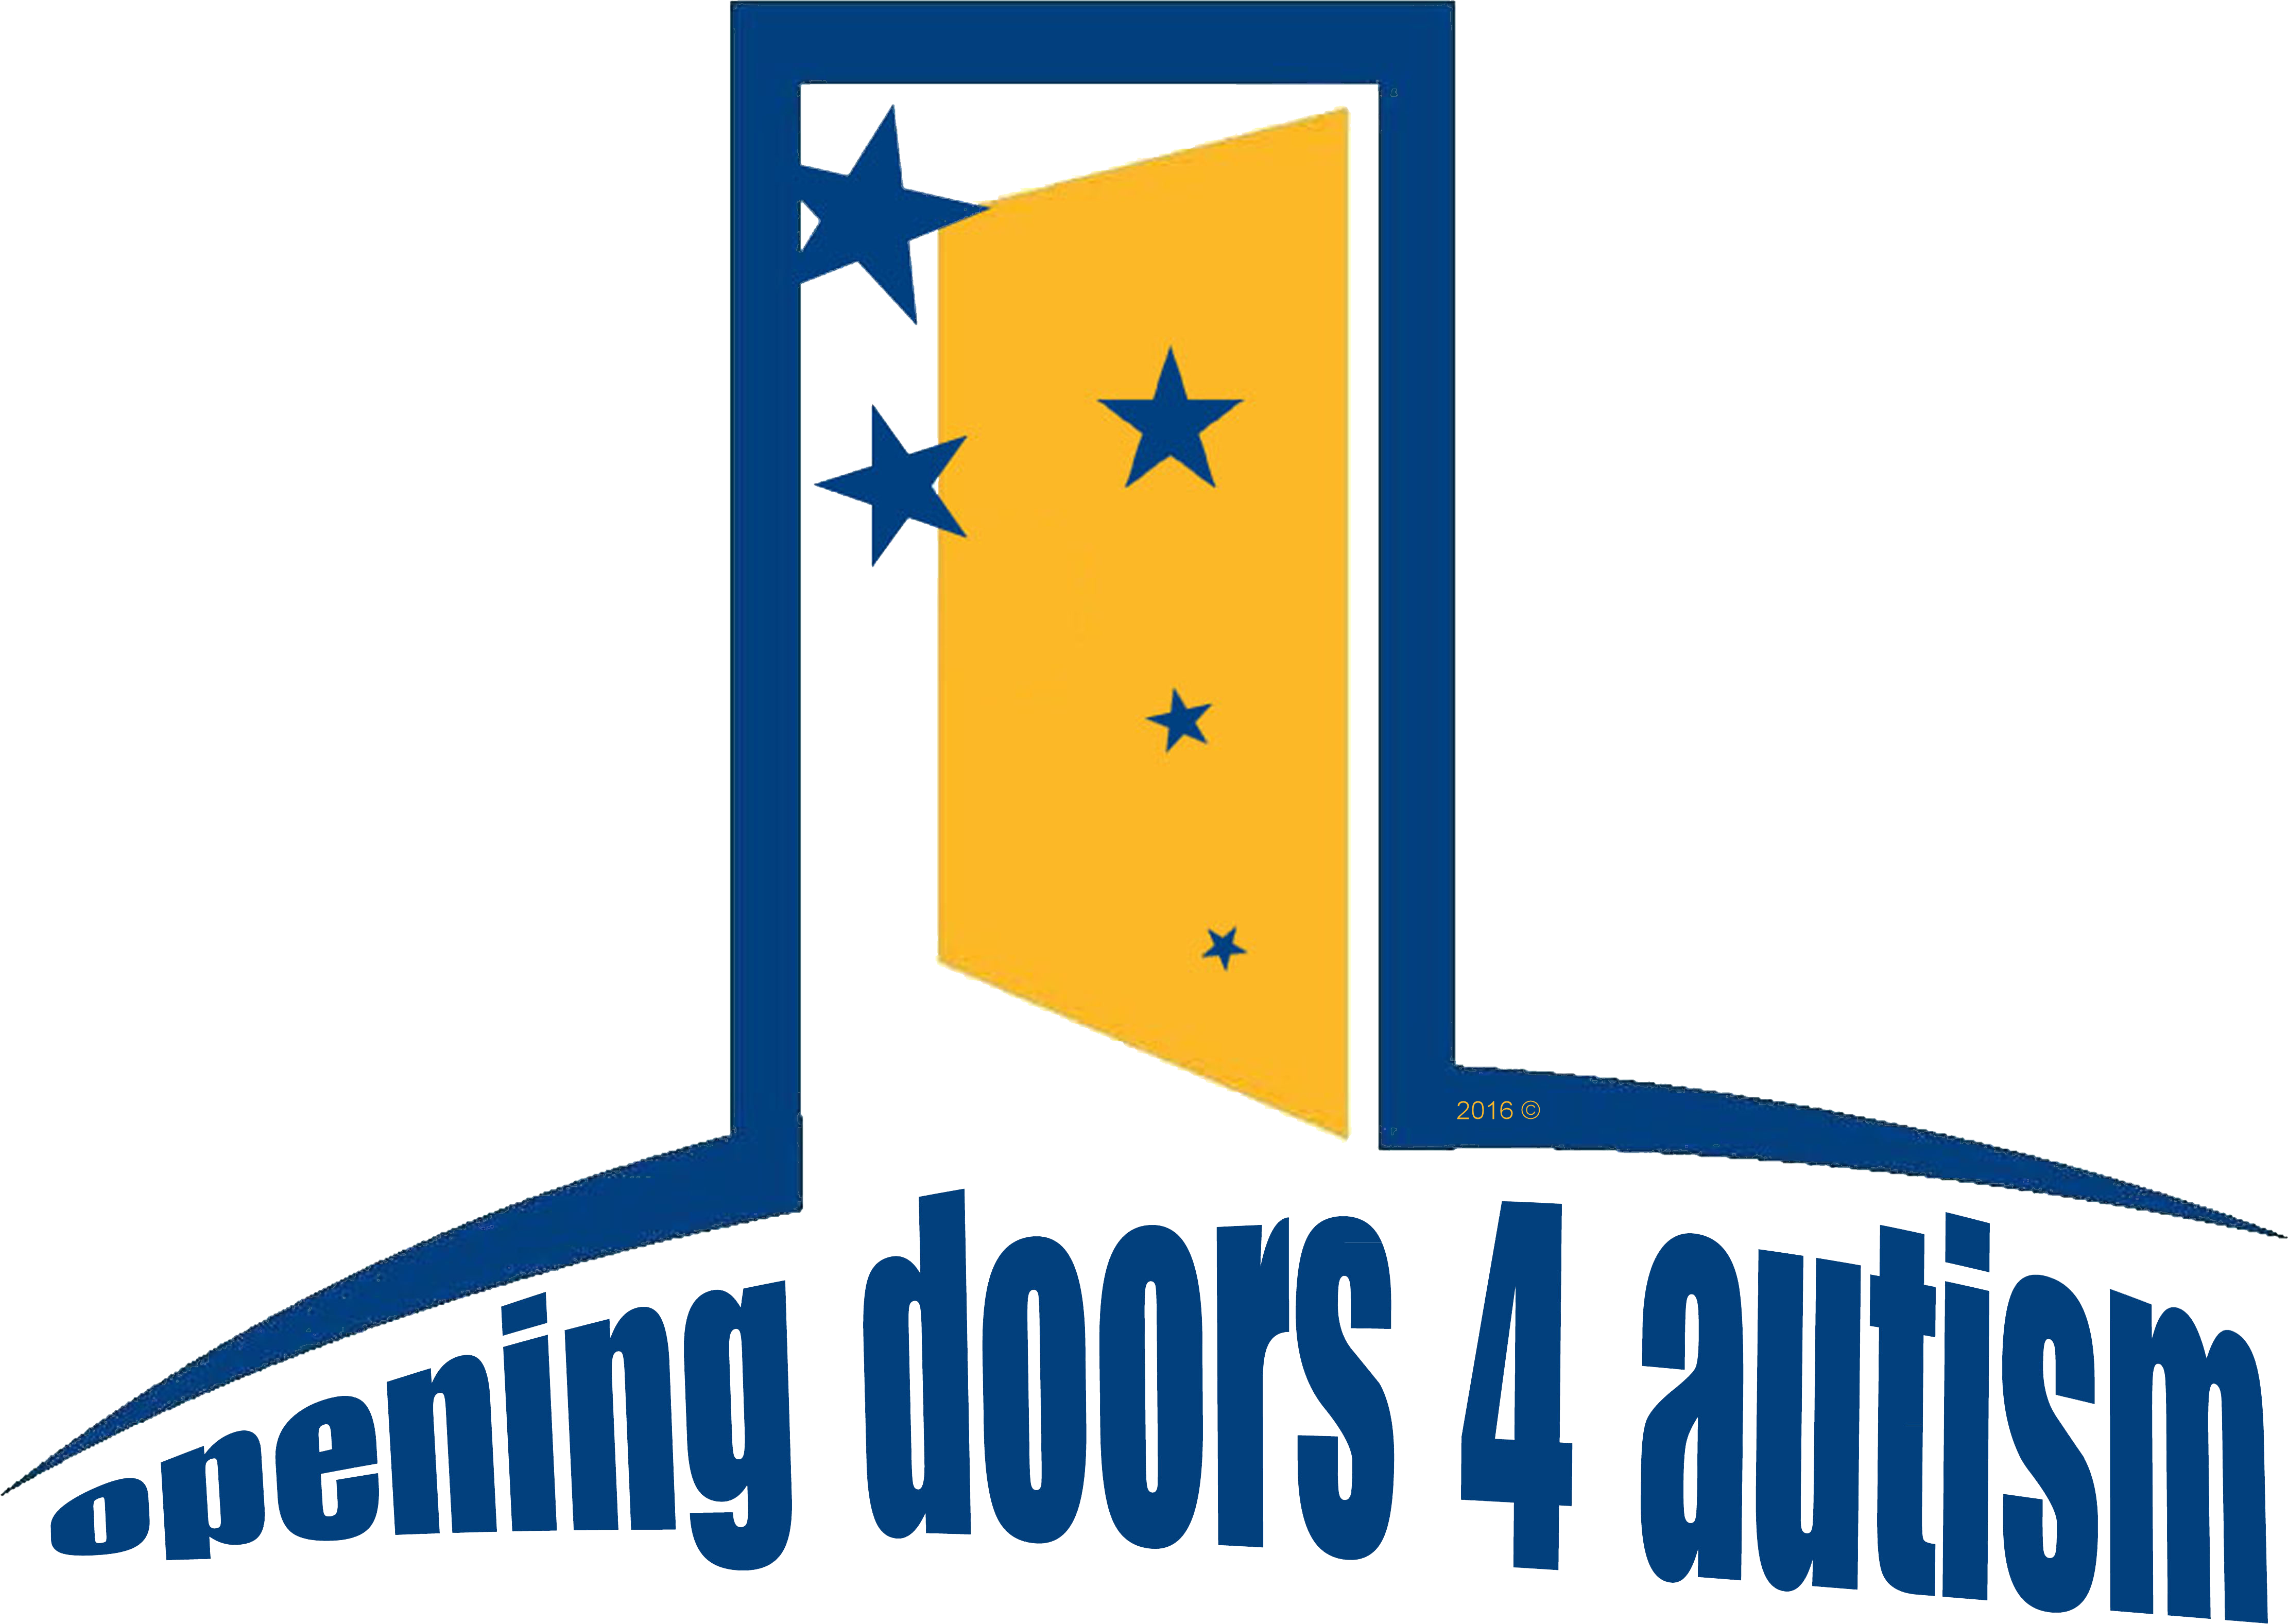 Opening Doors 4 Autism We Are A Group Of Self-advocates, - Opening Doors 4 Autism We Are A Group Of Self-advocates, (4443x3154)